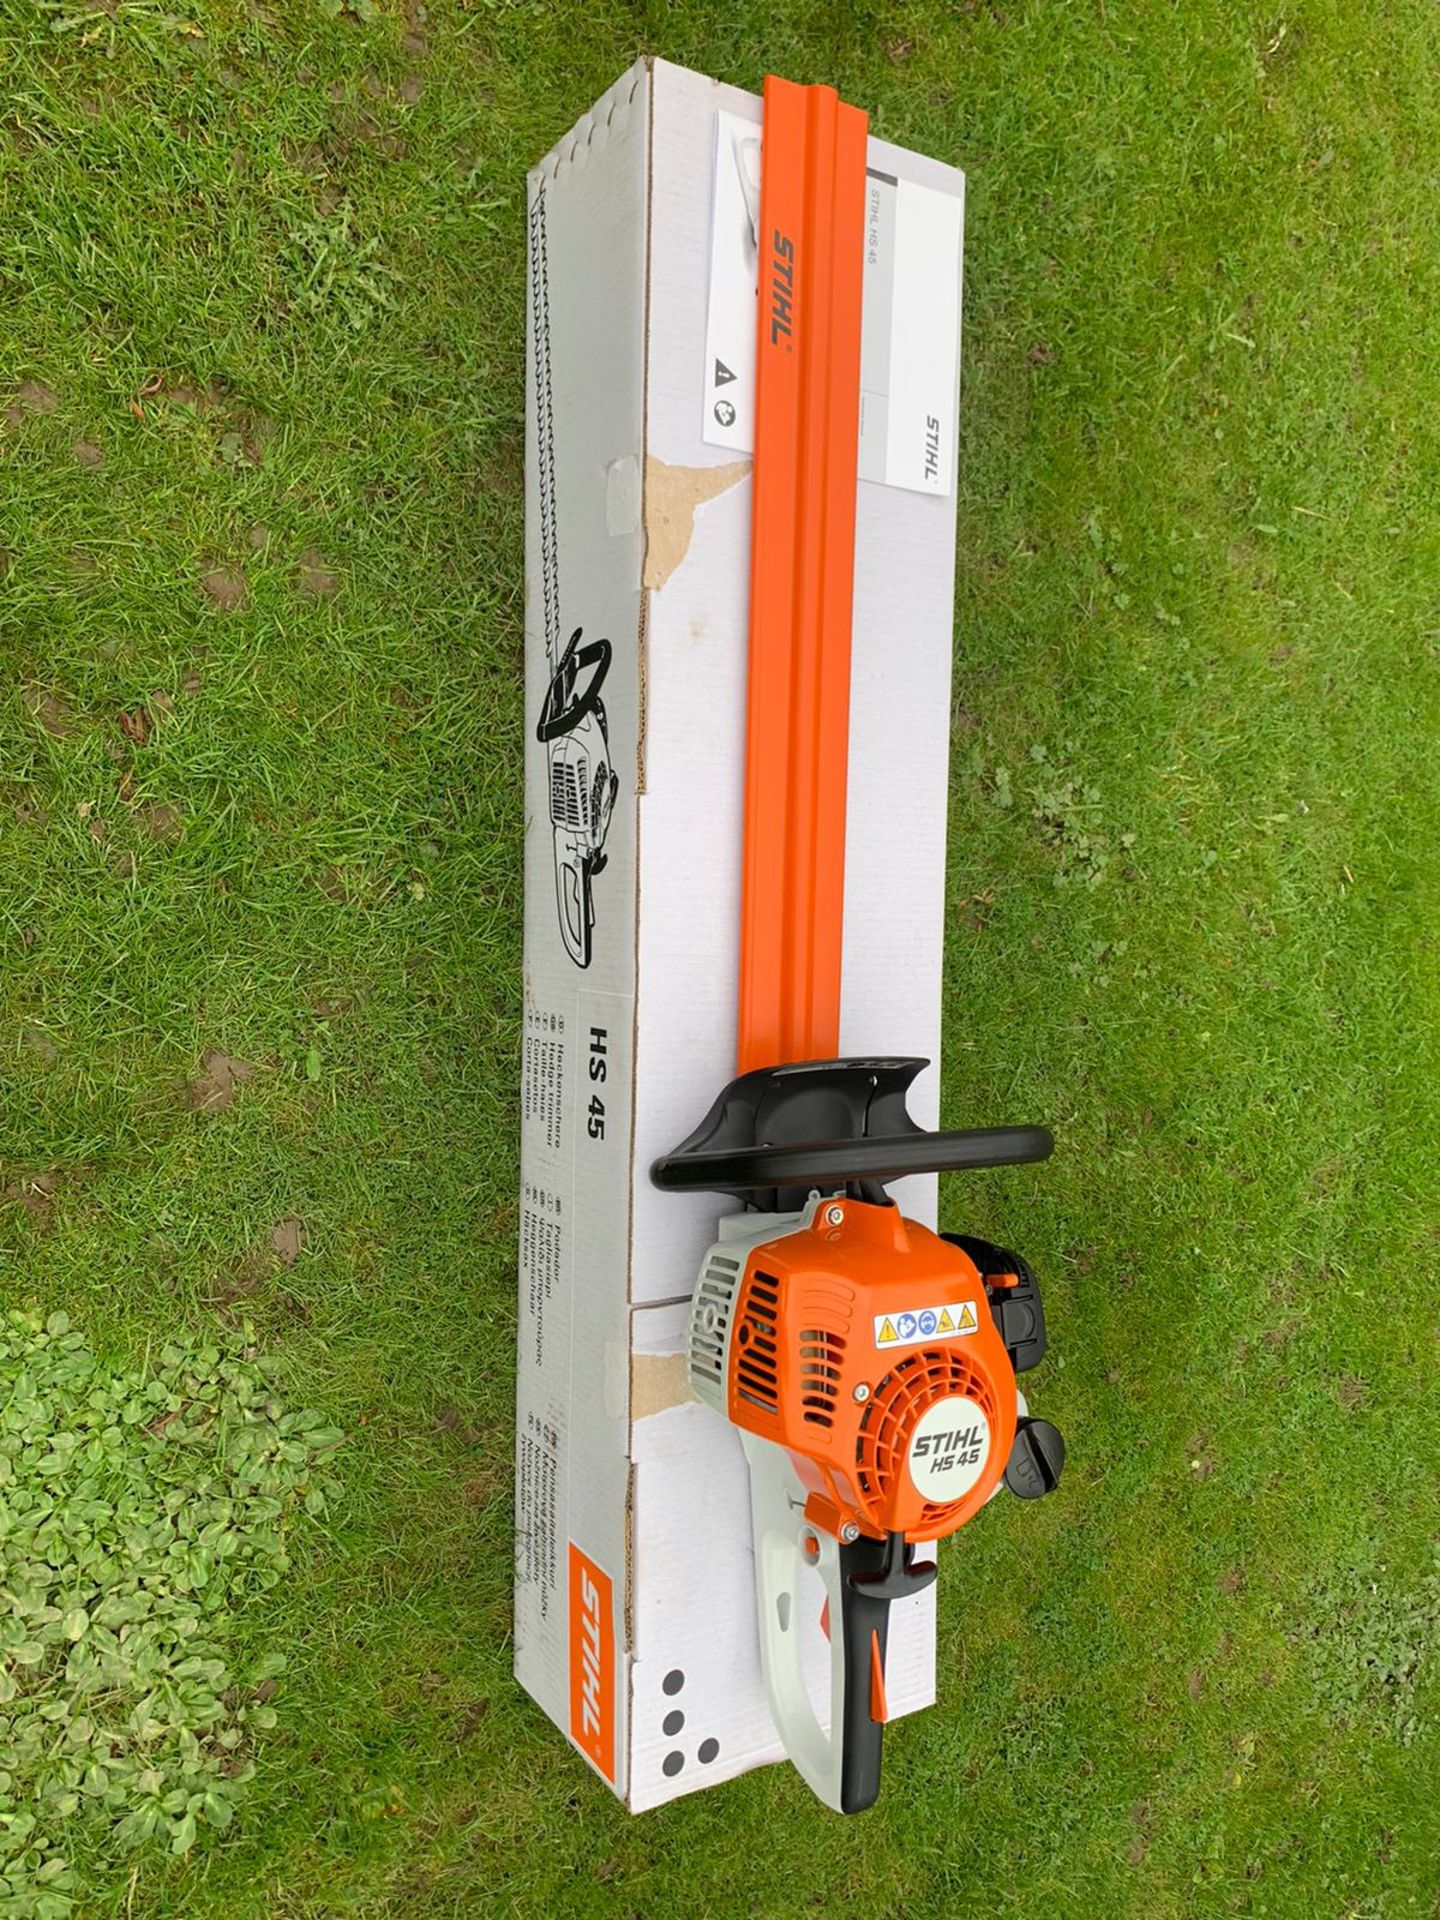 BRAND NEW AND UNUSED STIHL HS45 HEDGE CUTTER, 24" BLADE, COMES WITH MANUAL *NO VAT* - Image 3 of 3